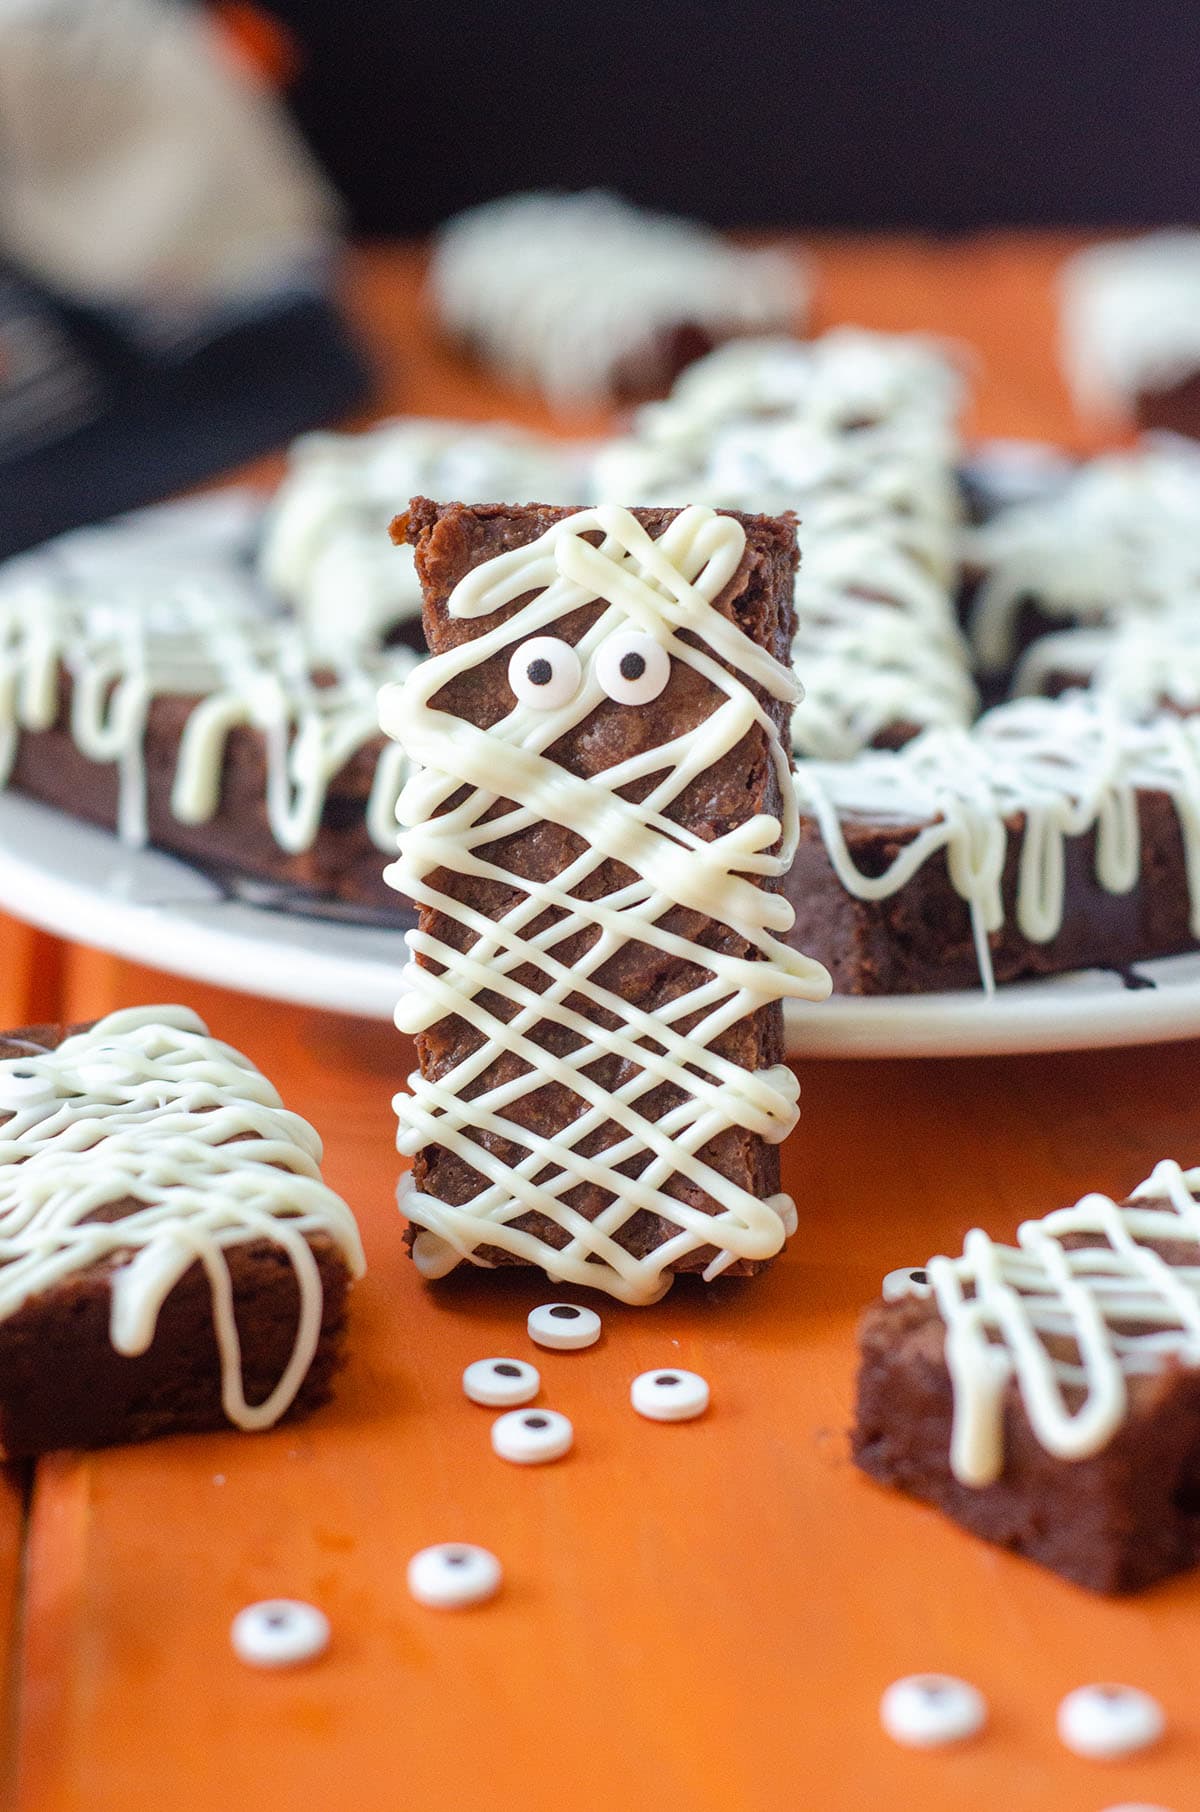 How To Make Mummy Brownies: Turn ordinary from-scratch brownies into a seasonally spooky treat! With white chocolate and candy eyeballs, you'll be the most popular monster at the mash!